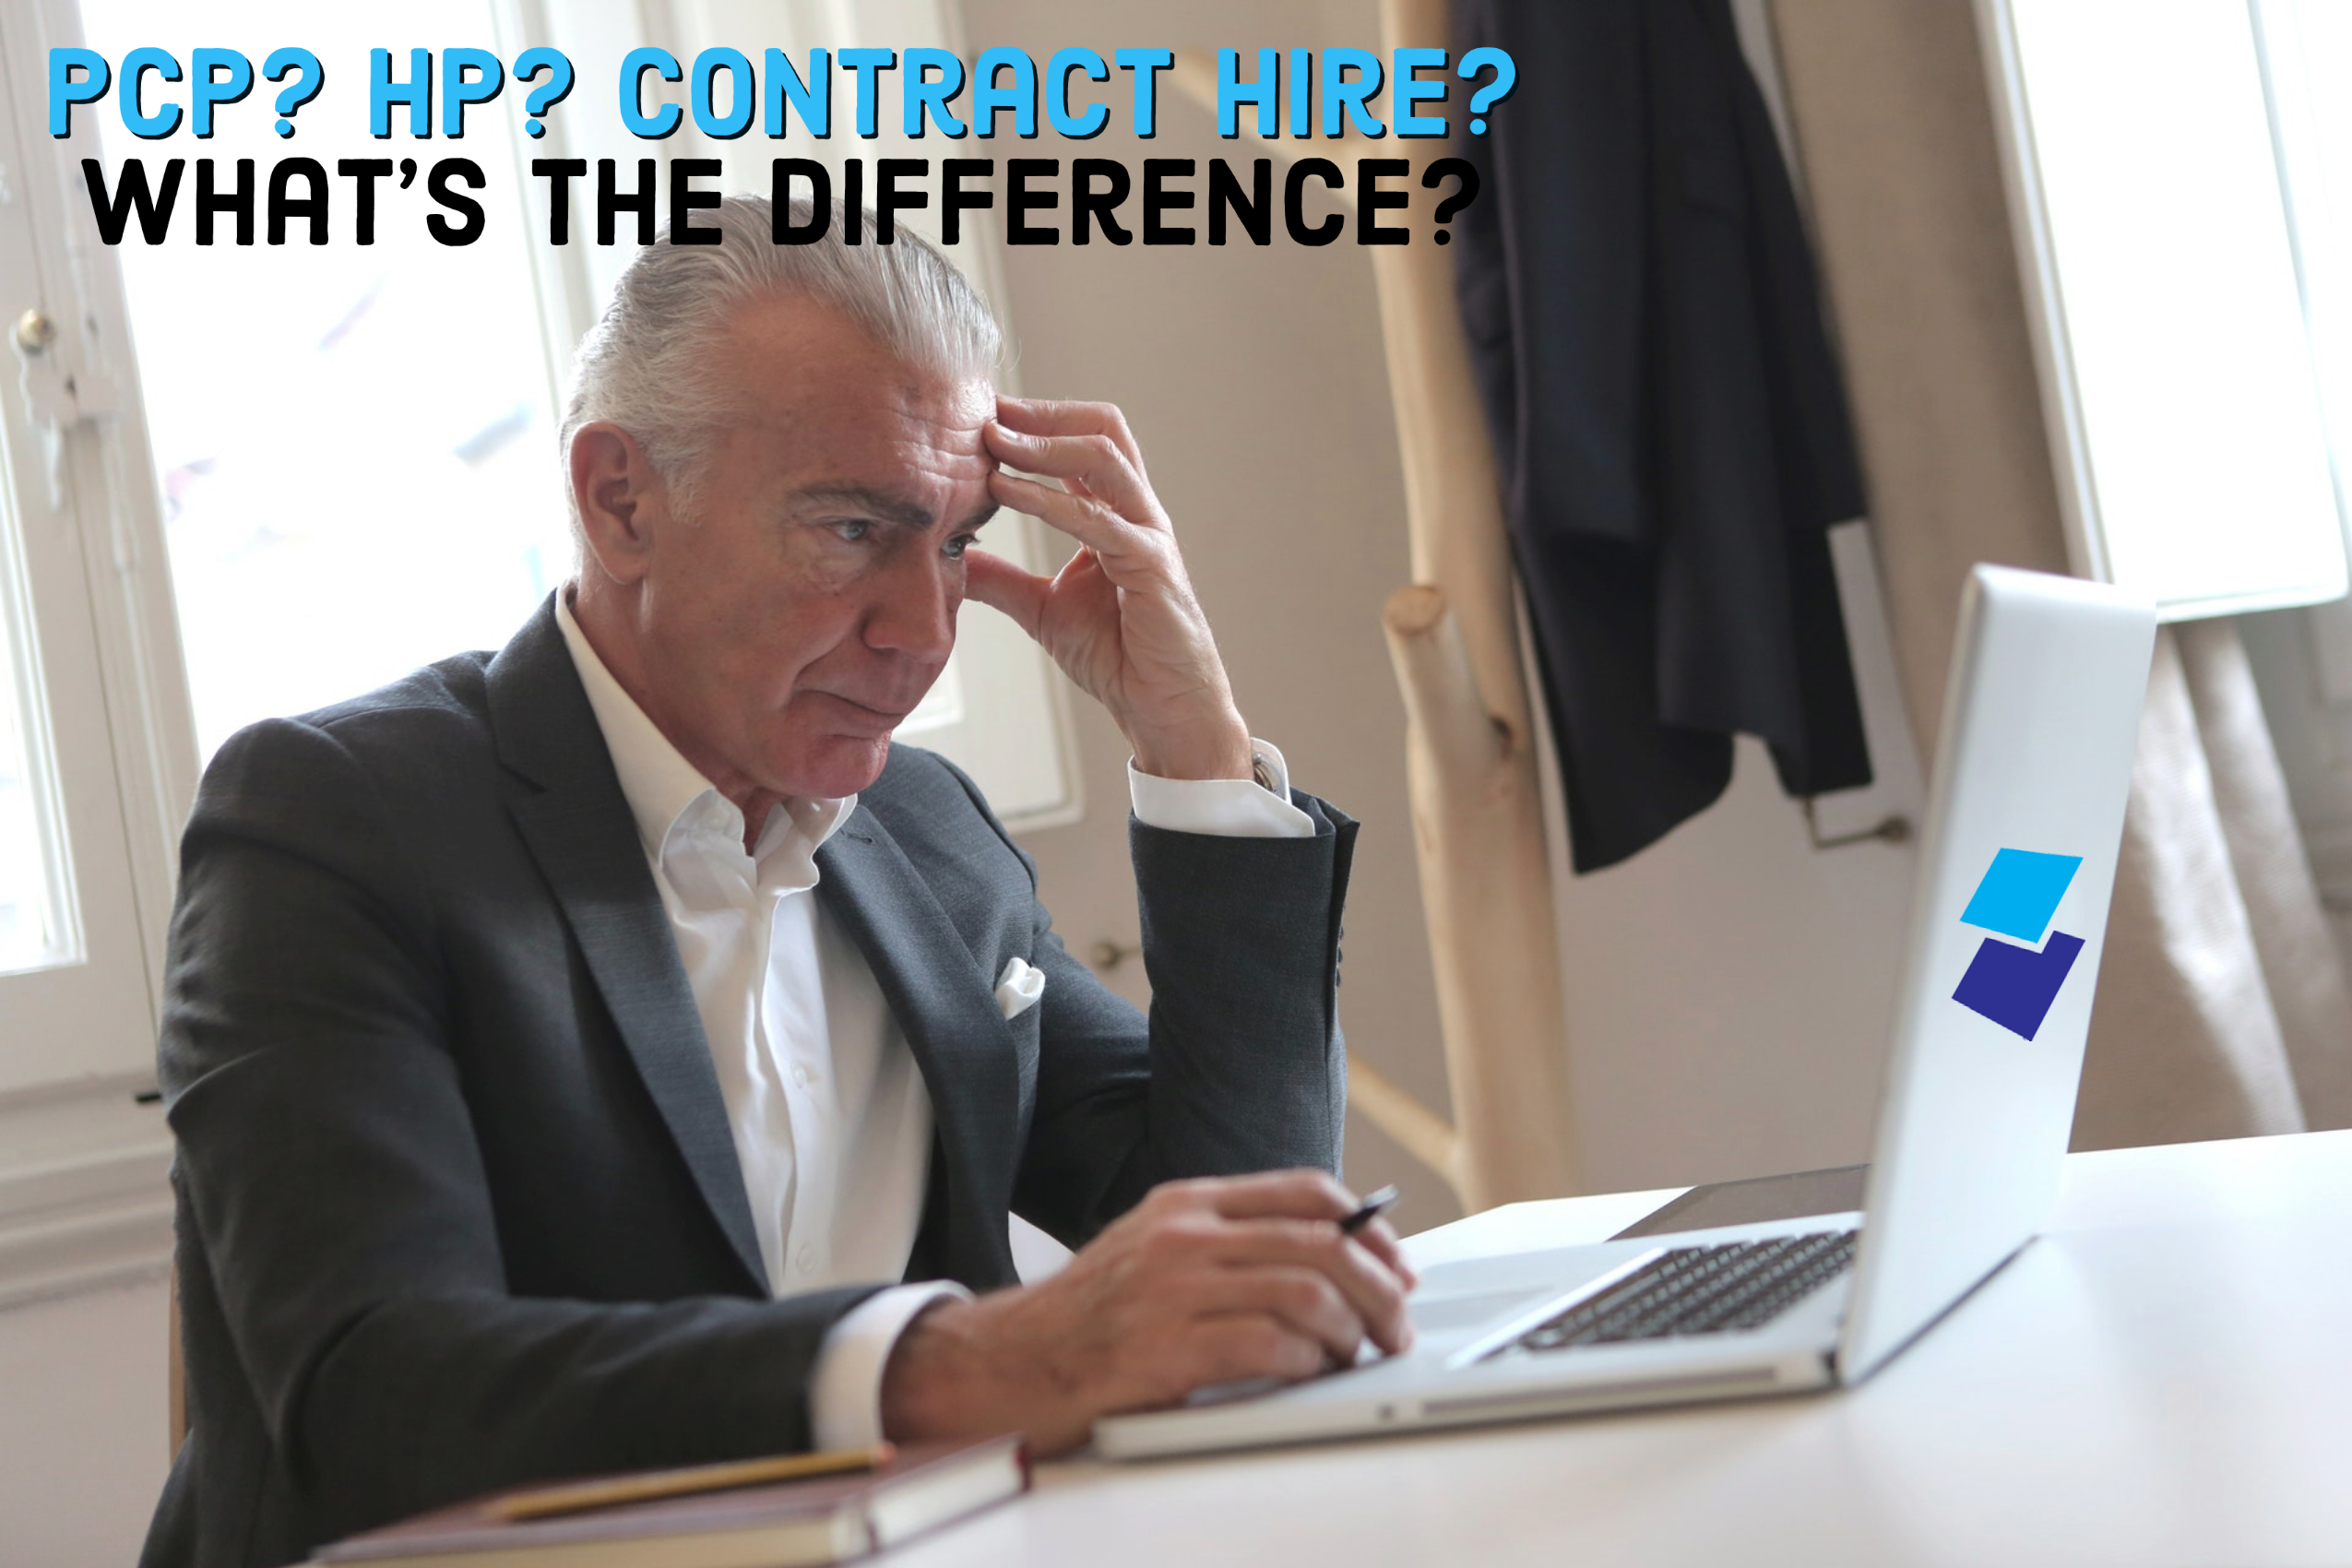 PCP, HP, Contract Hire, Lease… what is the difference?